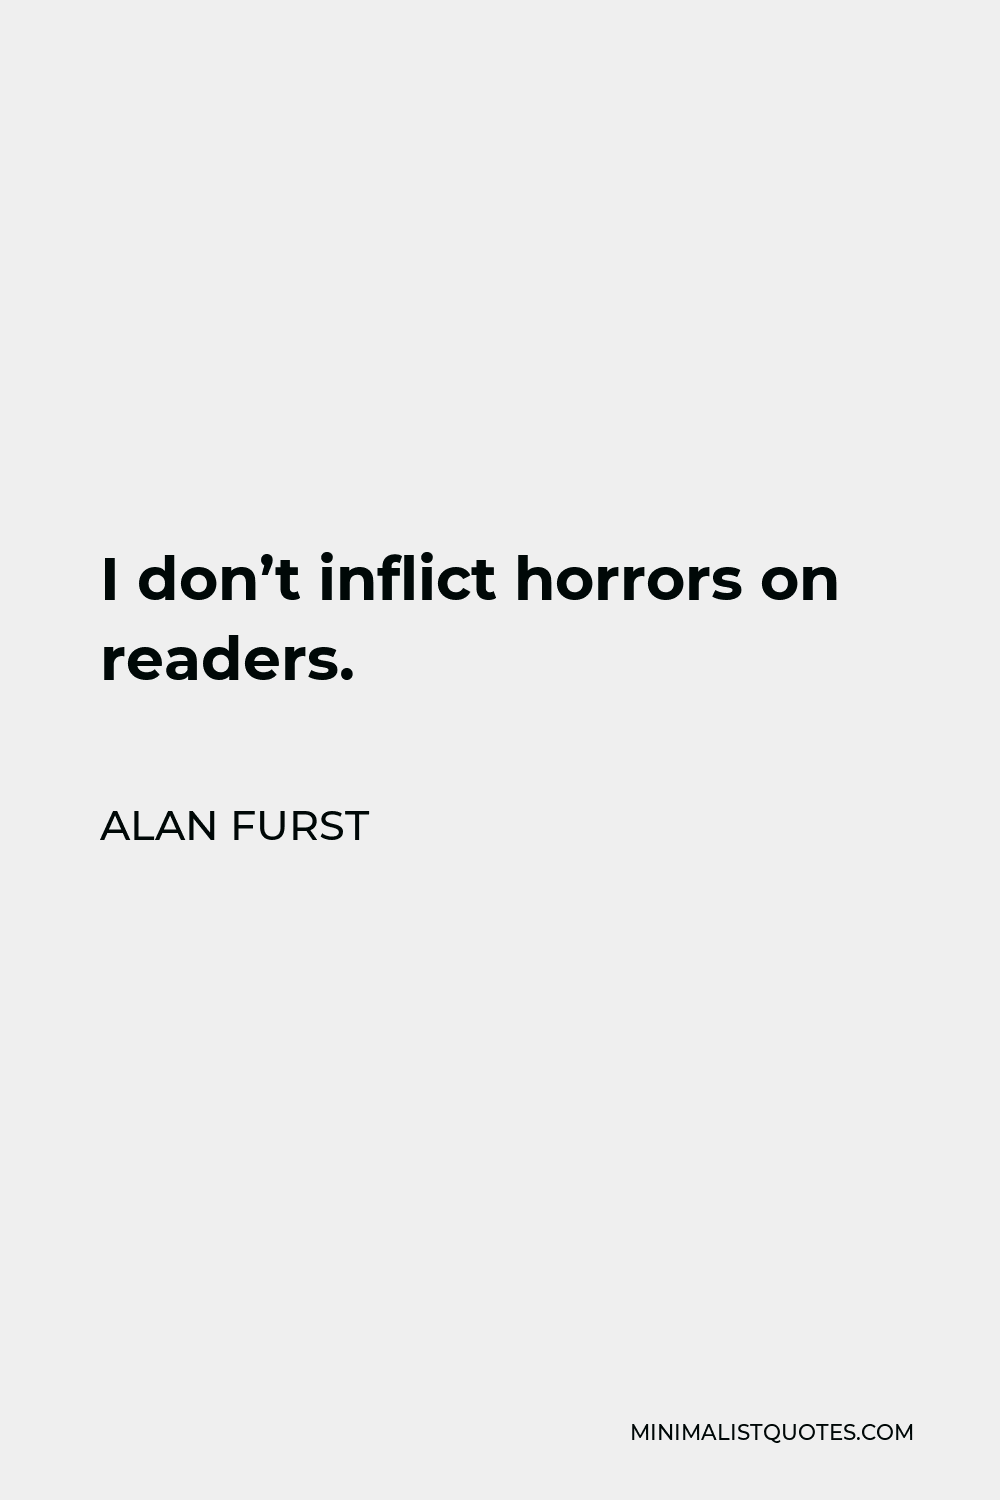 Alan Furst Quote - I don’t inflict horrors on readers.